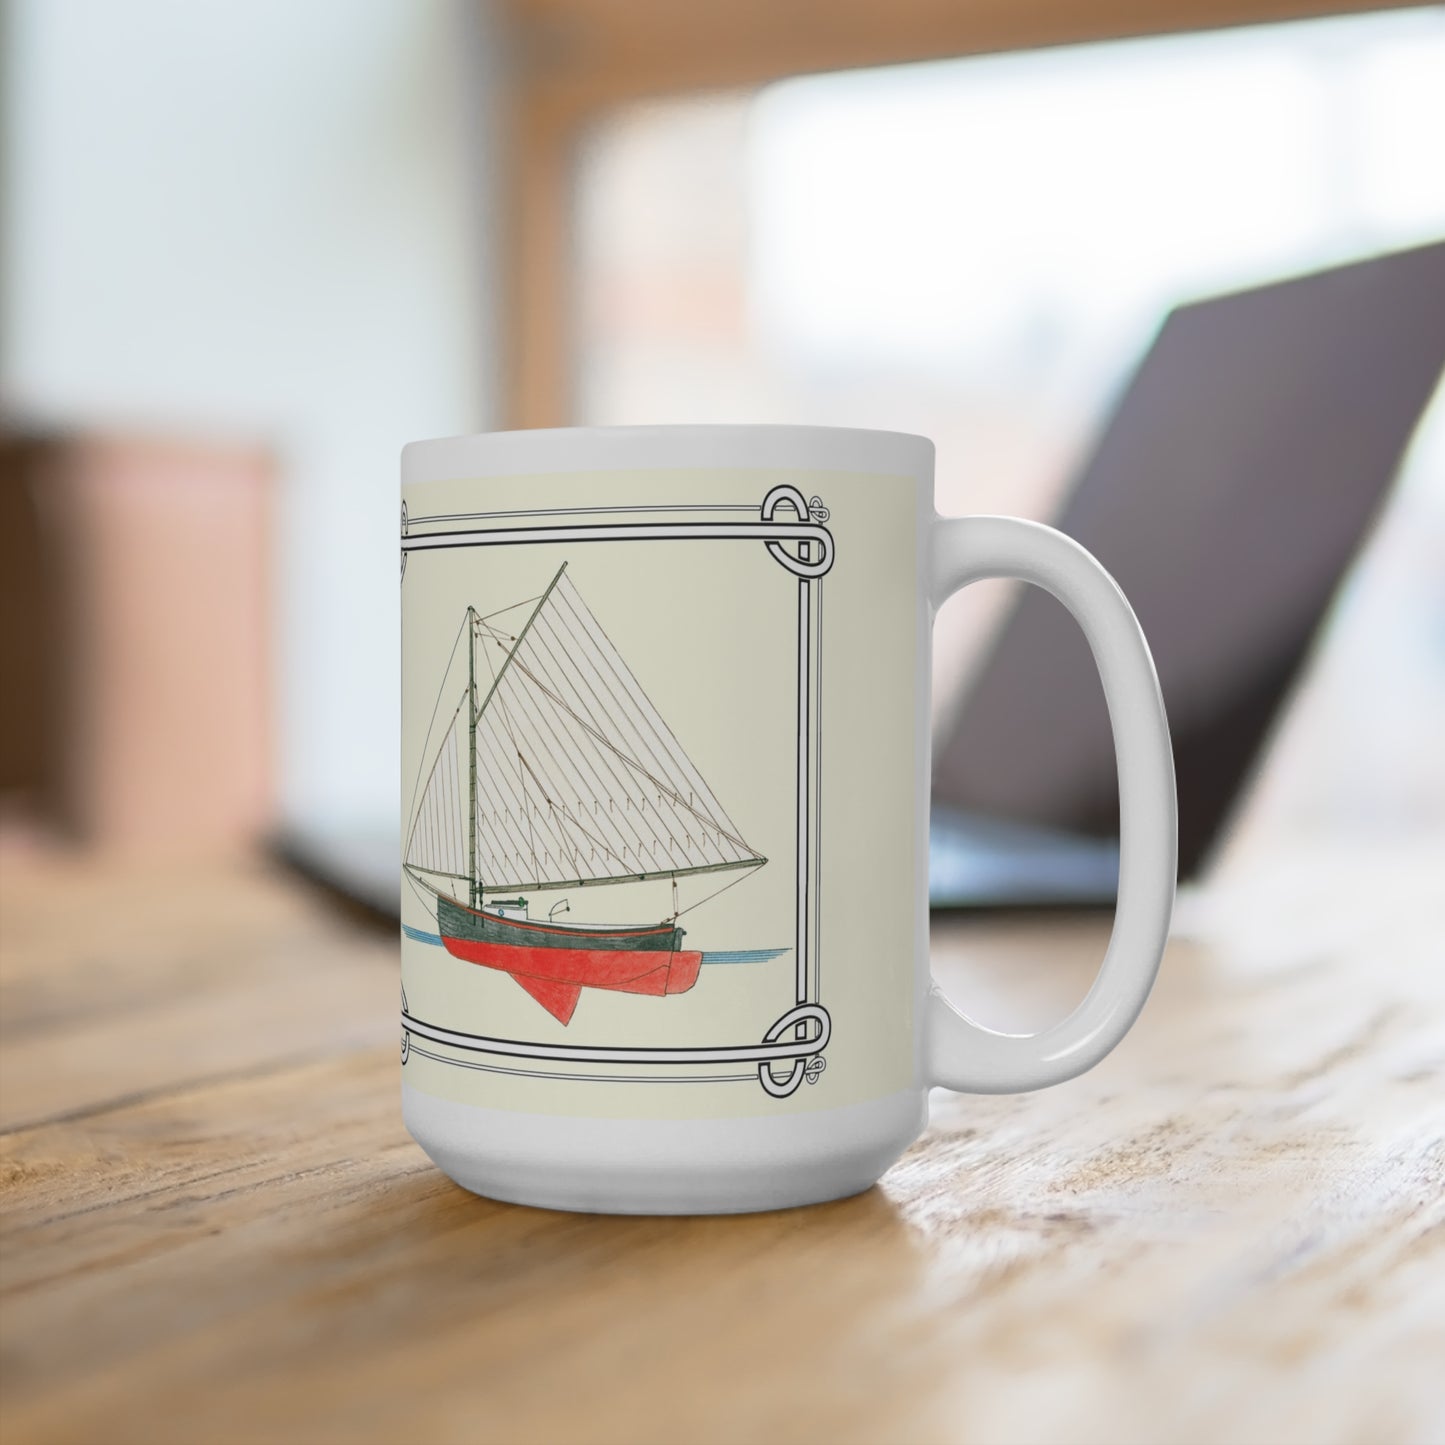 Breeze was a Noank Sloop. Enjoy your favorite beverage in this mug while you work on your laptop.